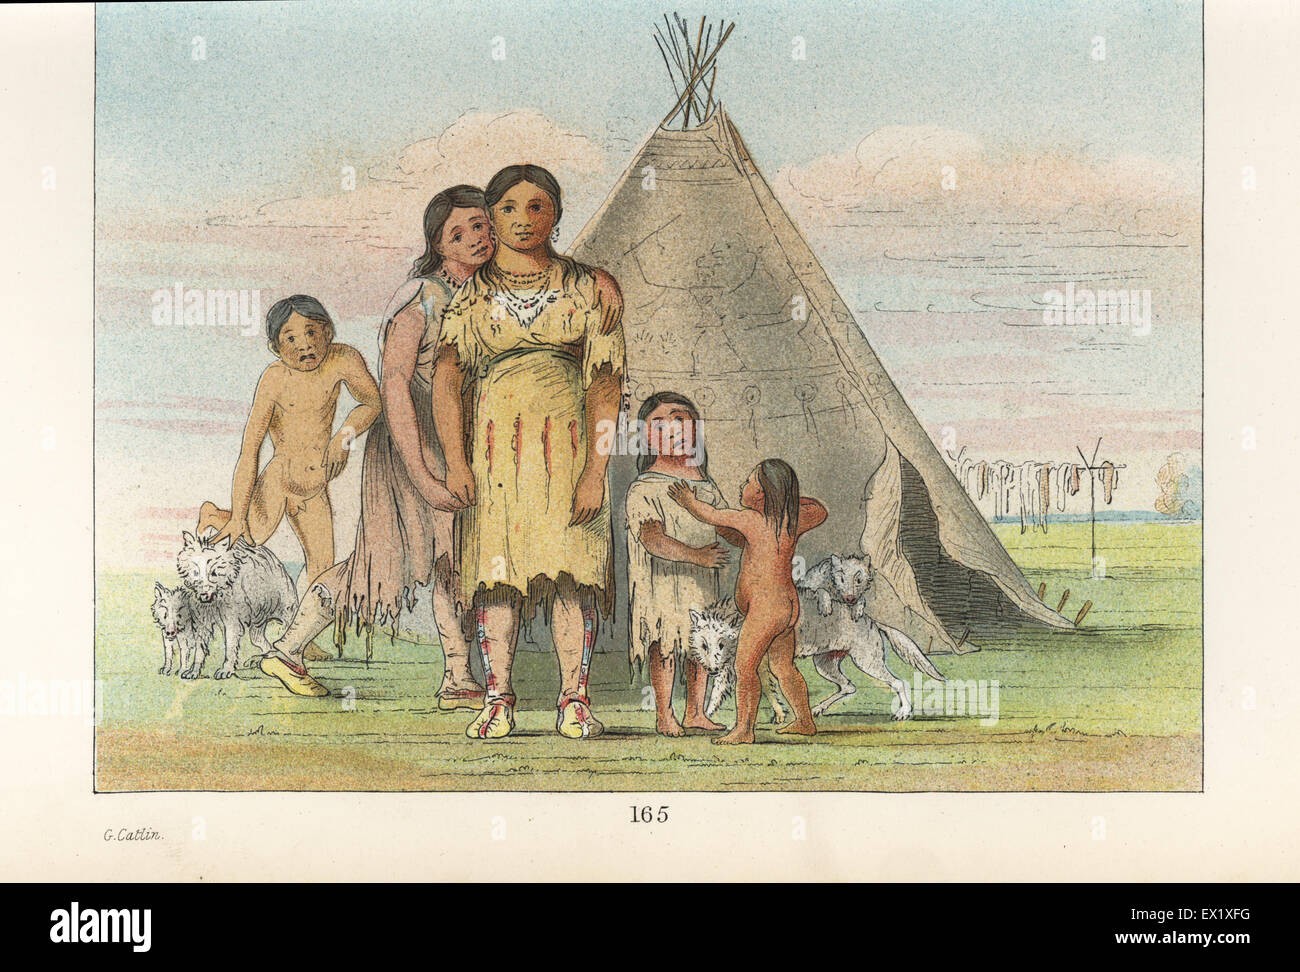 Wives and children of a chief outside their teepee in the Comanche village. Buffalo meat drying on poles behind. Handcoloured lithograph from George Catlin's Manners, Customs and Condition of the North American Indians, London, 1841. Stock Photo